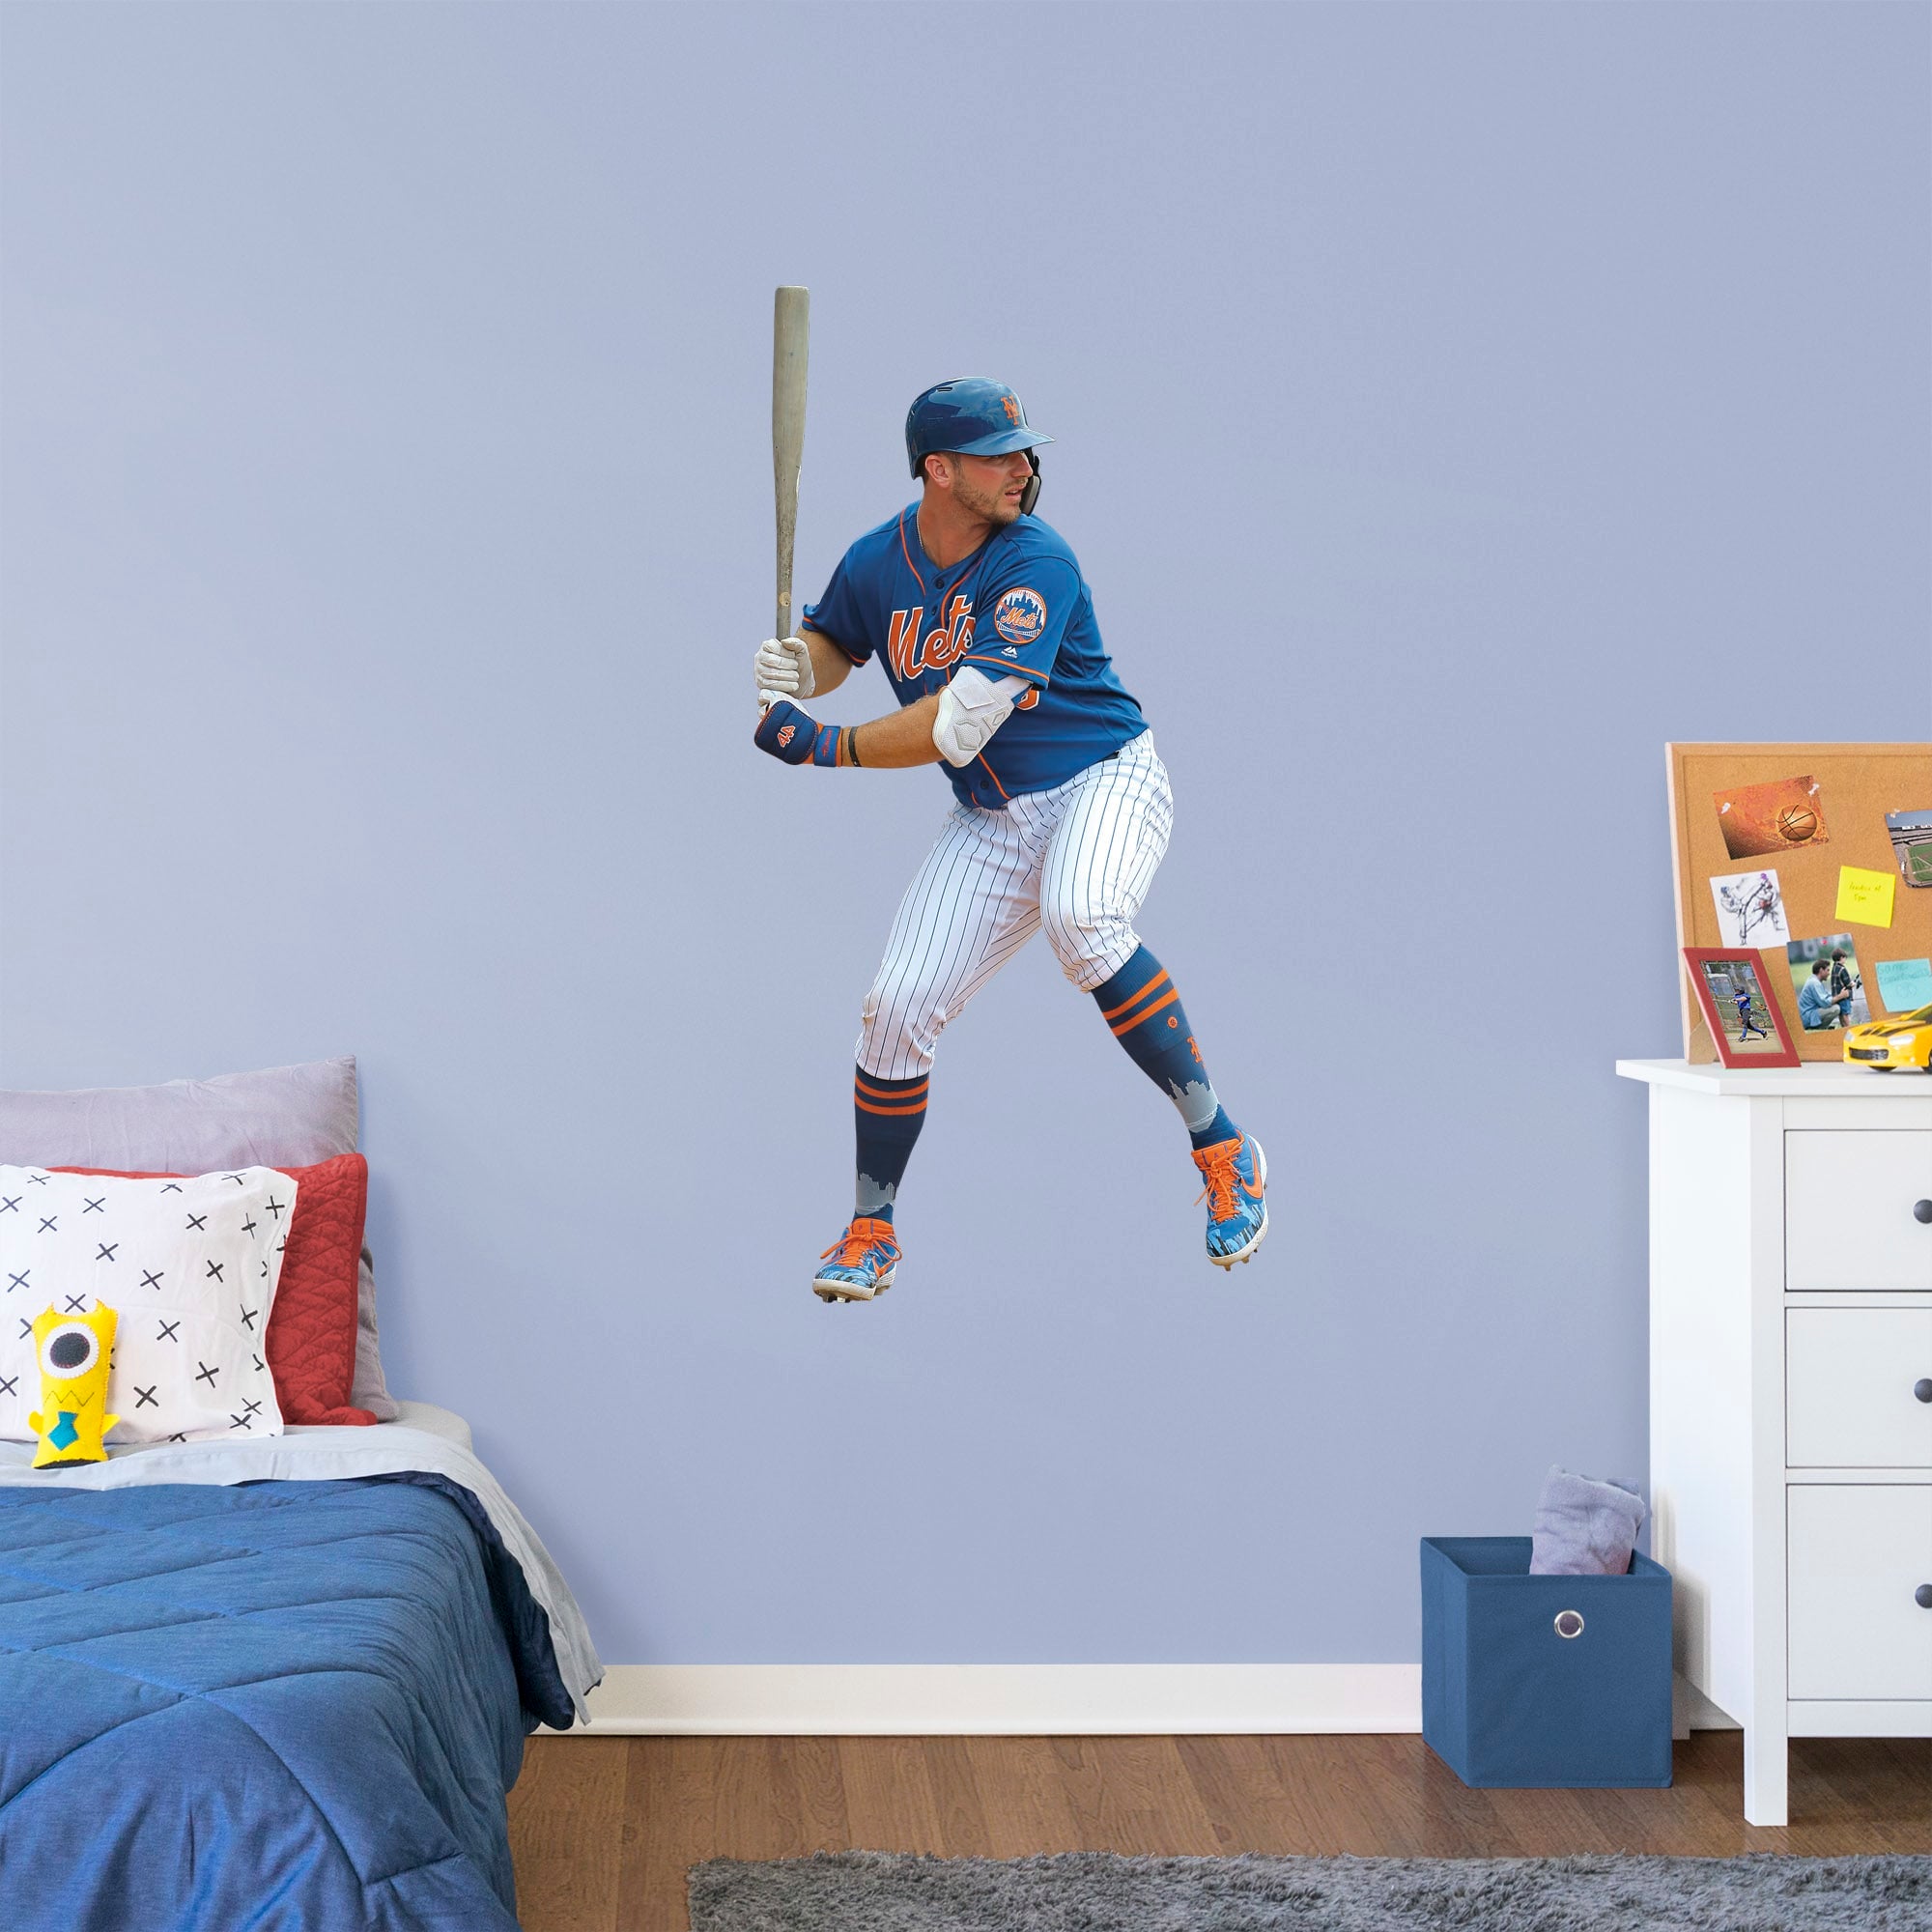 Pete Alonso for New York Mets - Officially Licensed MLB Removable Wall Decal Giant Athlete + 2 Decals (26"W x 51"H) by Fathead |